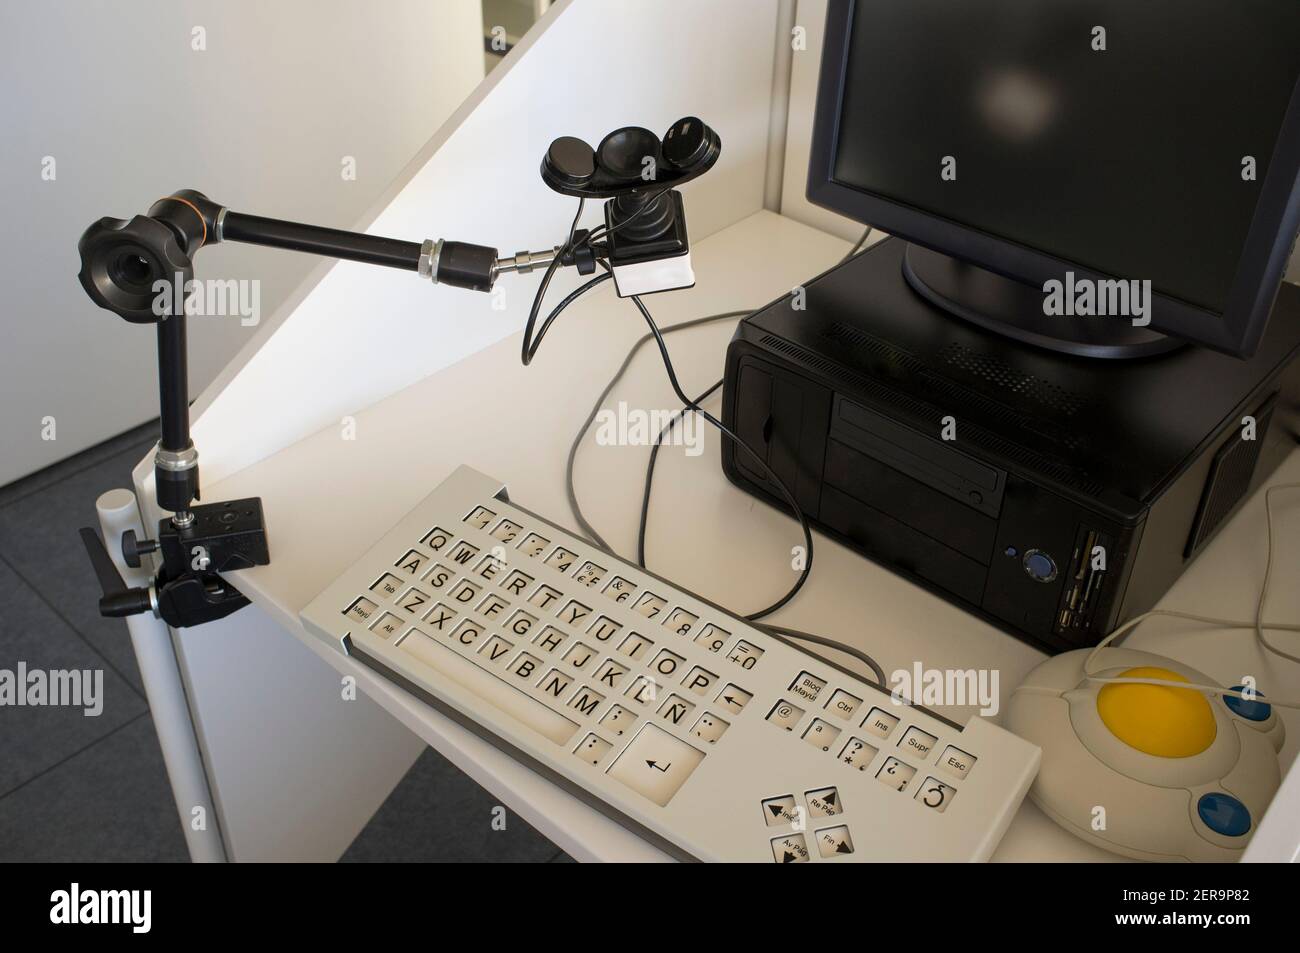 Computer for disabled users. It was equiped with alternate input devices like handsfree chin mouse, Adaptive keyboard and trackball Stock Photo